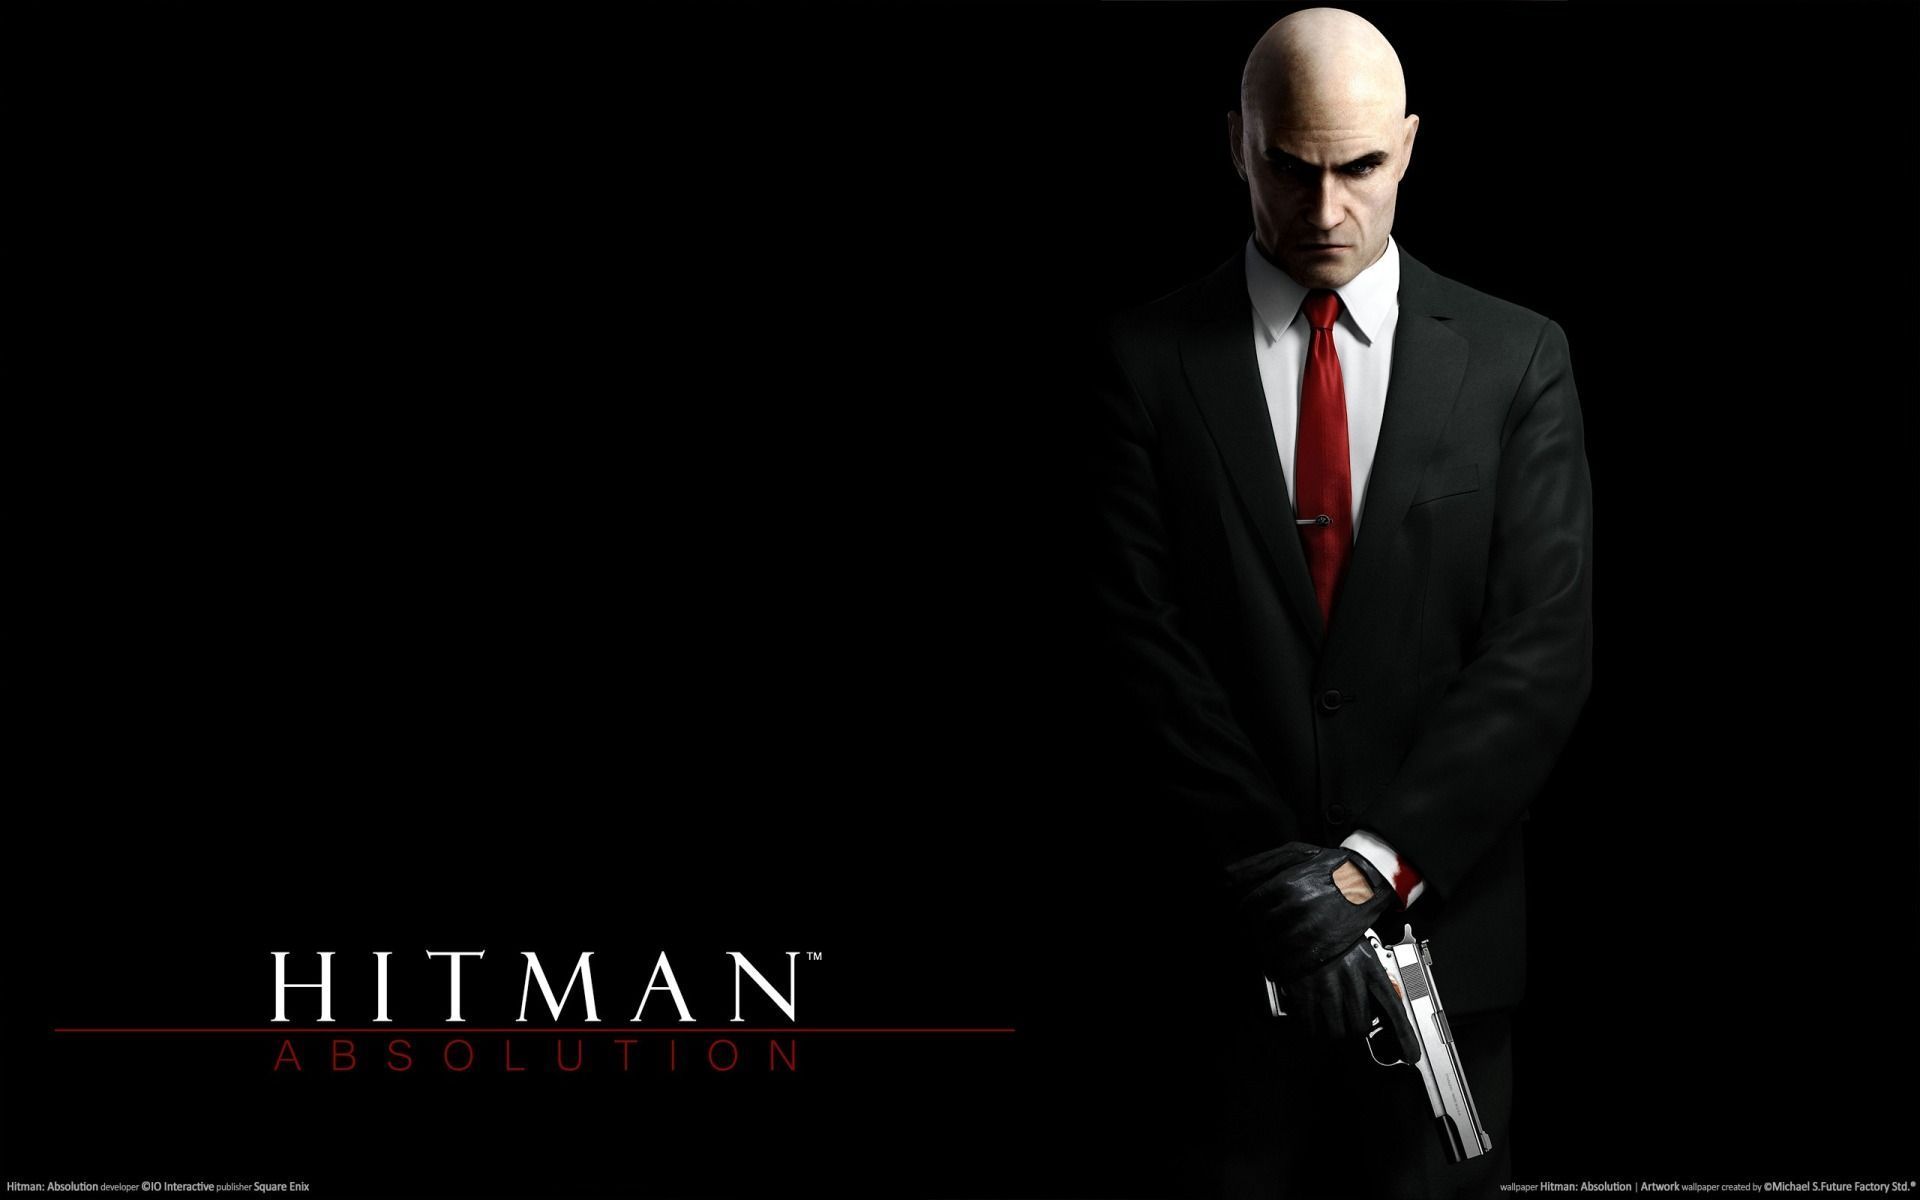 Hitman: Absolution Wallpaper, Picture, Image